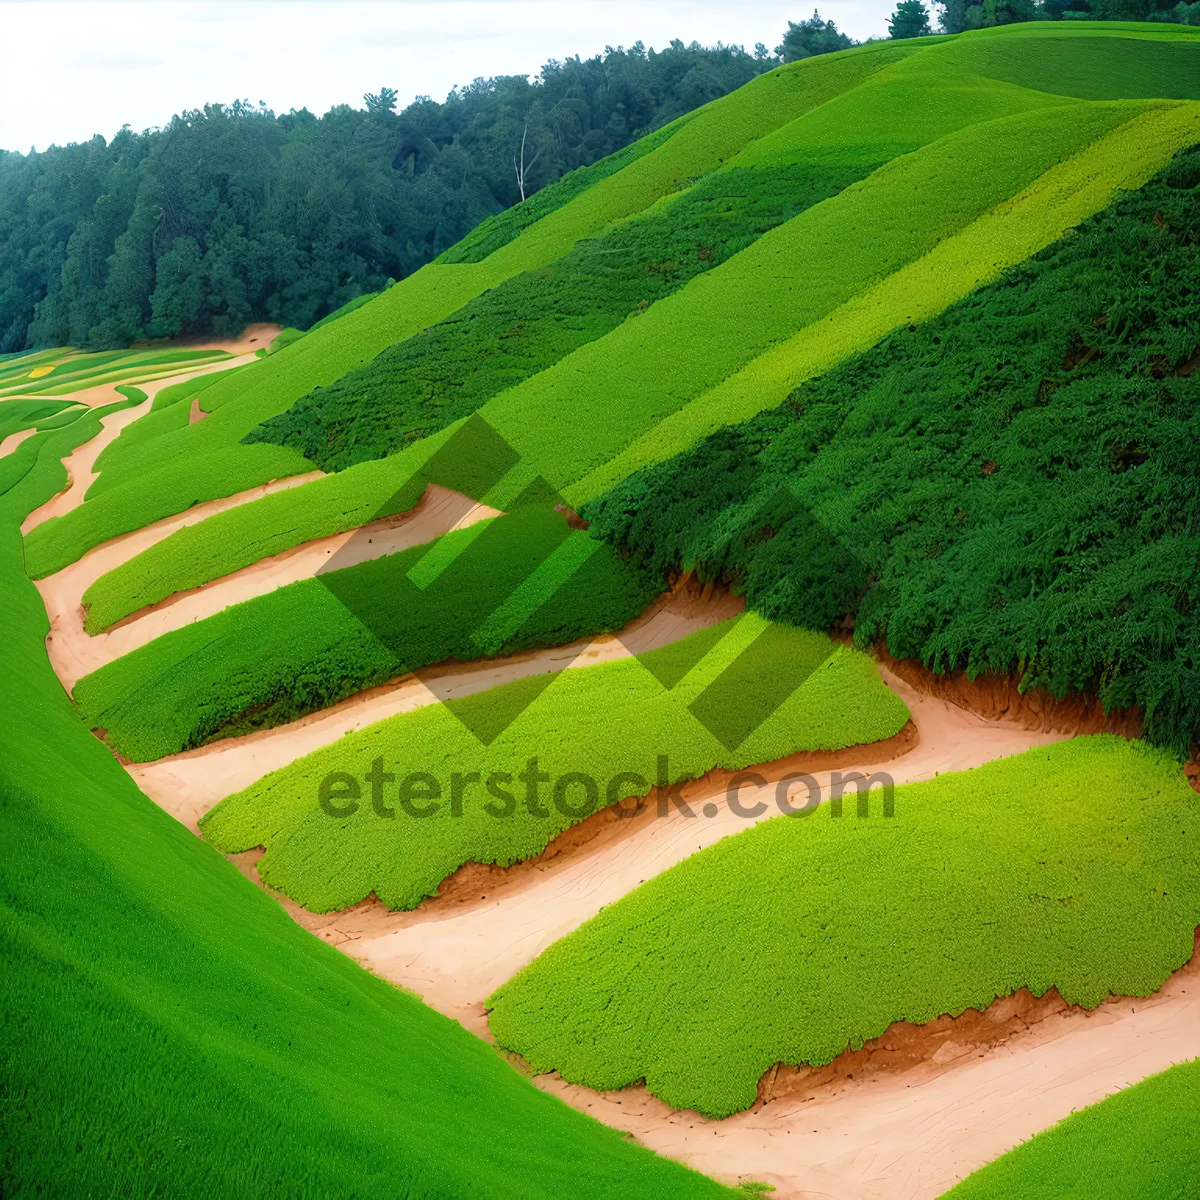 Picture of Vibrant Golf Course Surrounded by Lush Landscape